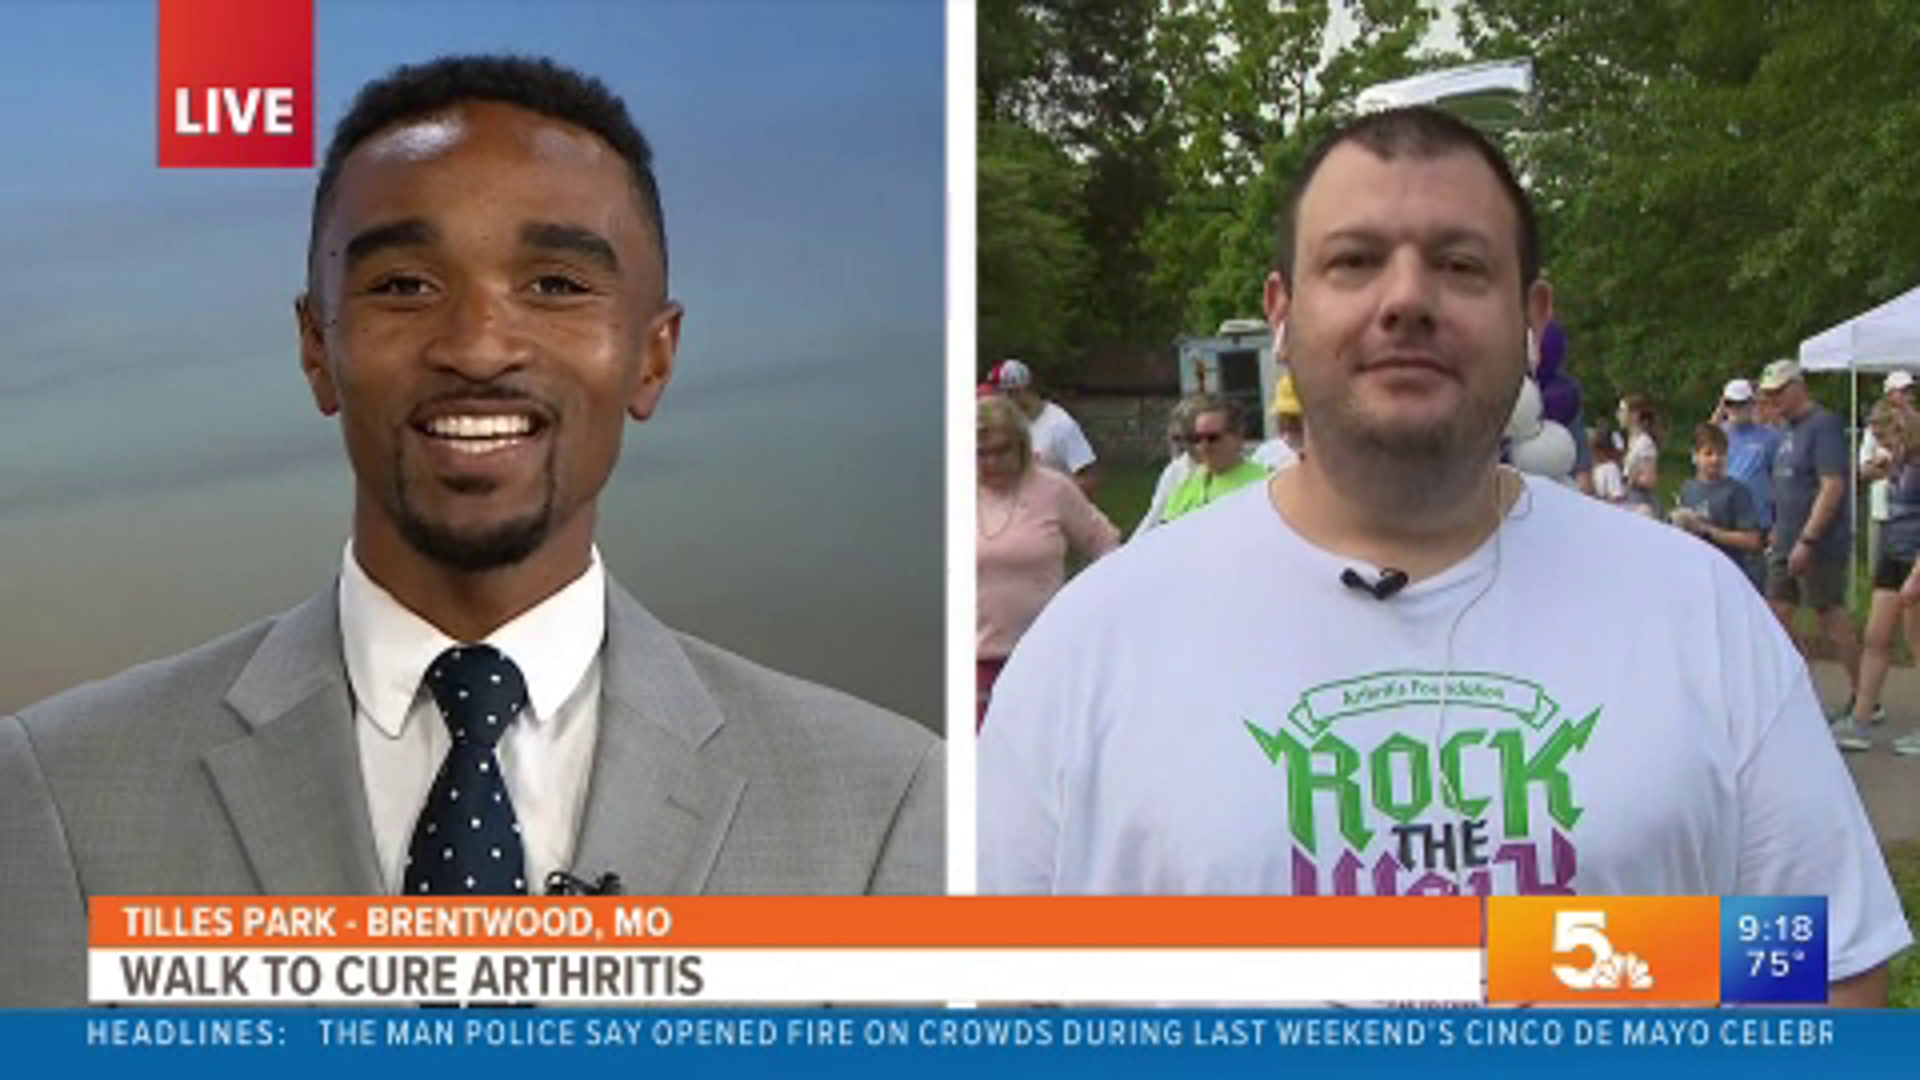 Many gathered Saturday at Tilles Park to walk and raise money to find a cure for arthritis. Nearly $32,000 was raised at this year's event.